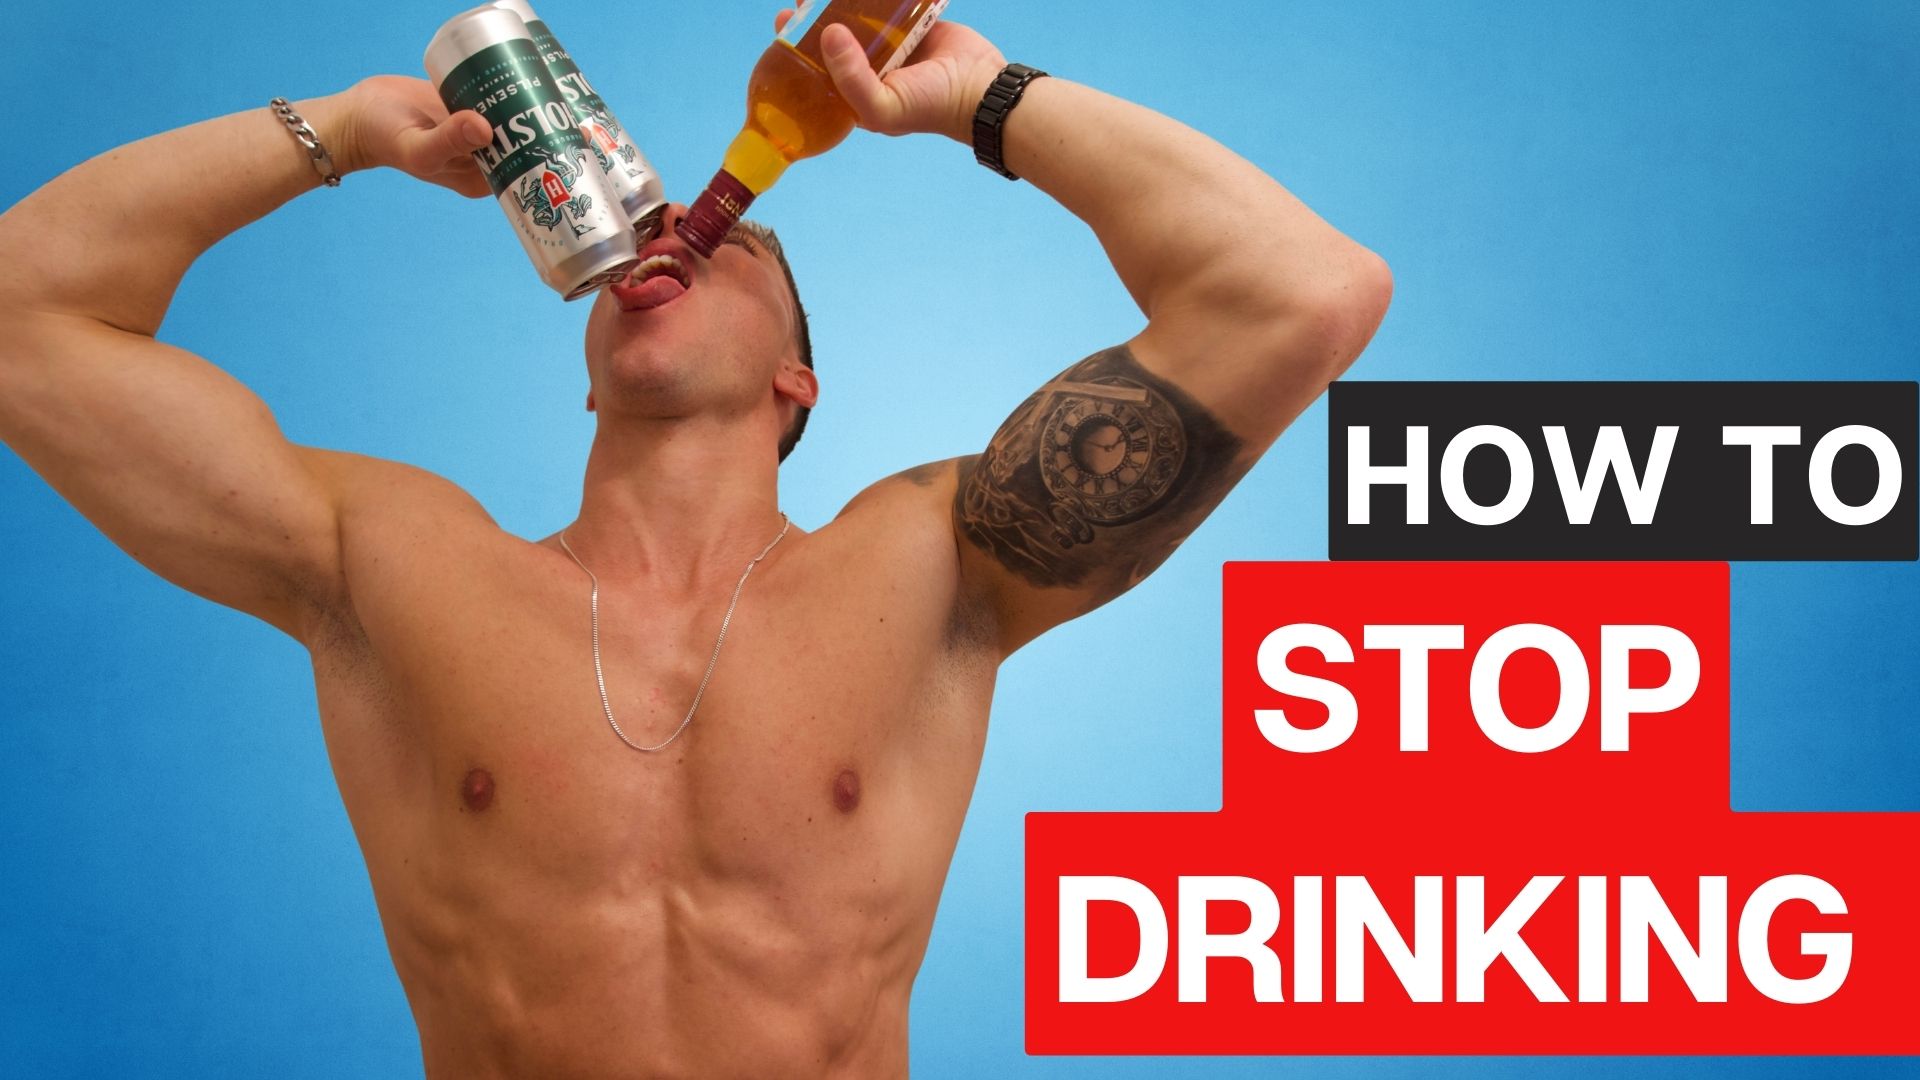 How to Stop Drinking Alcohol (Easily and Fast!)